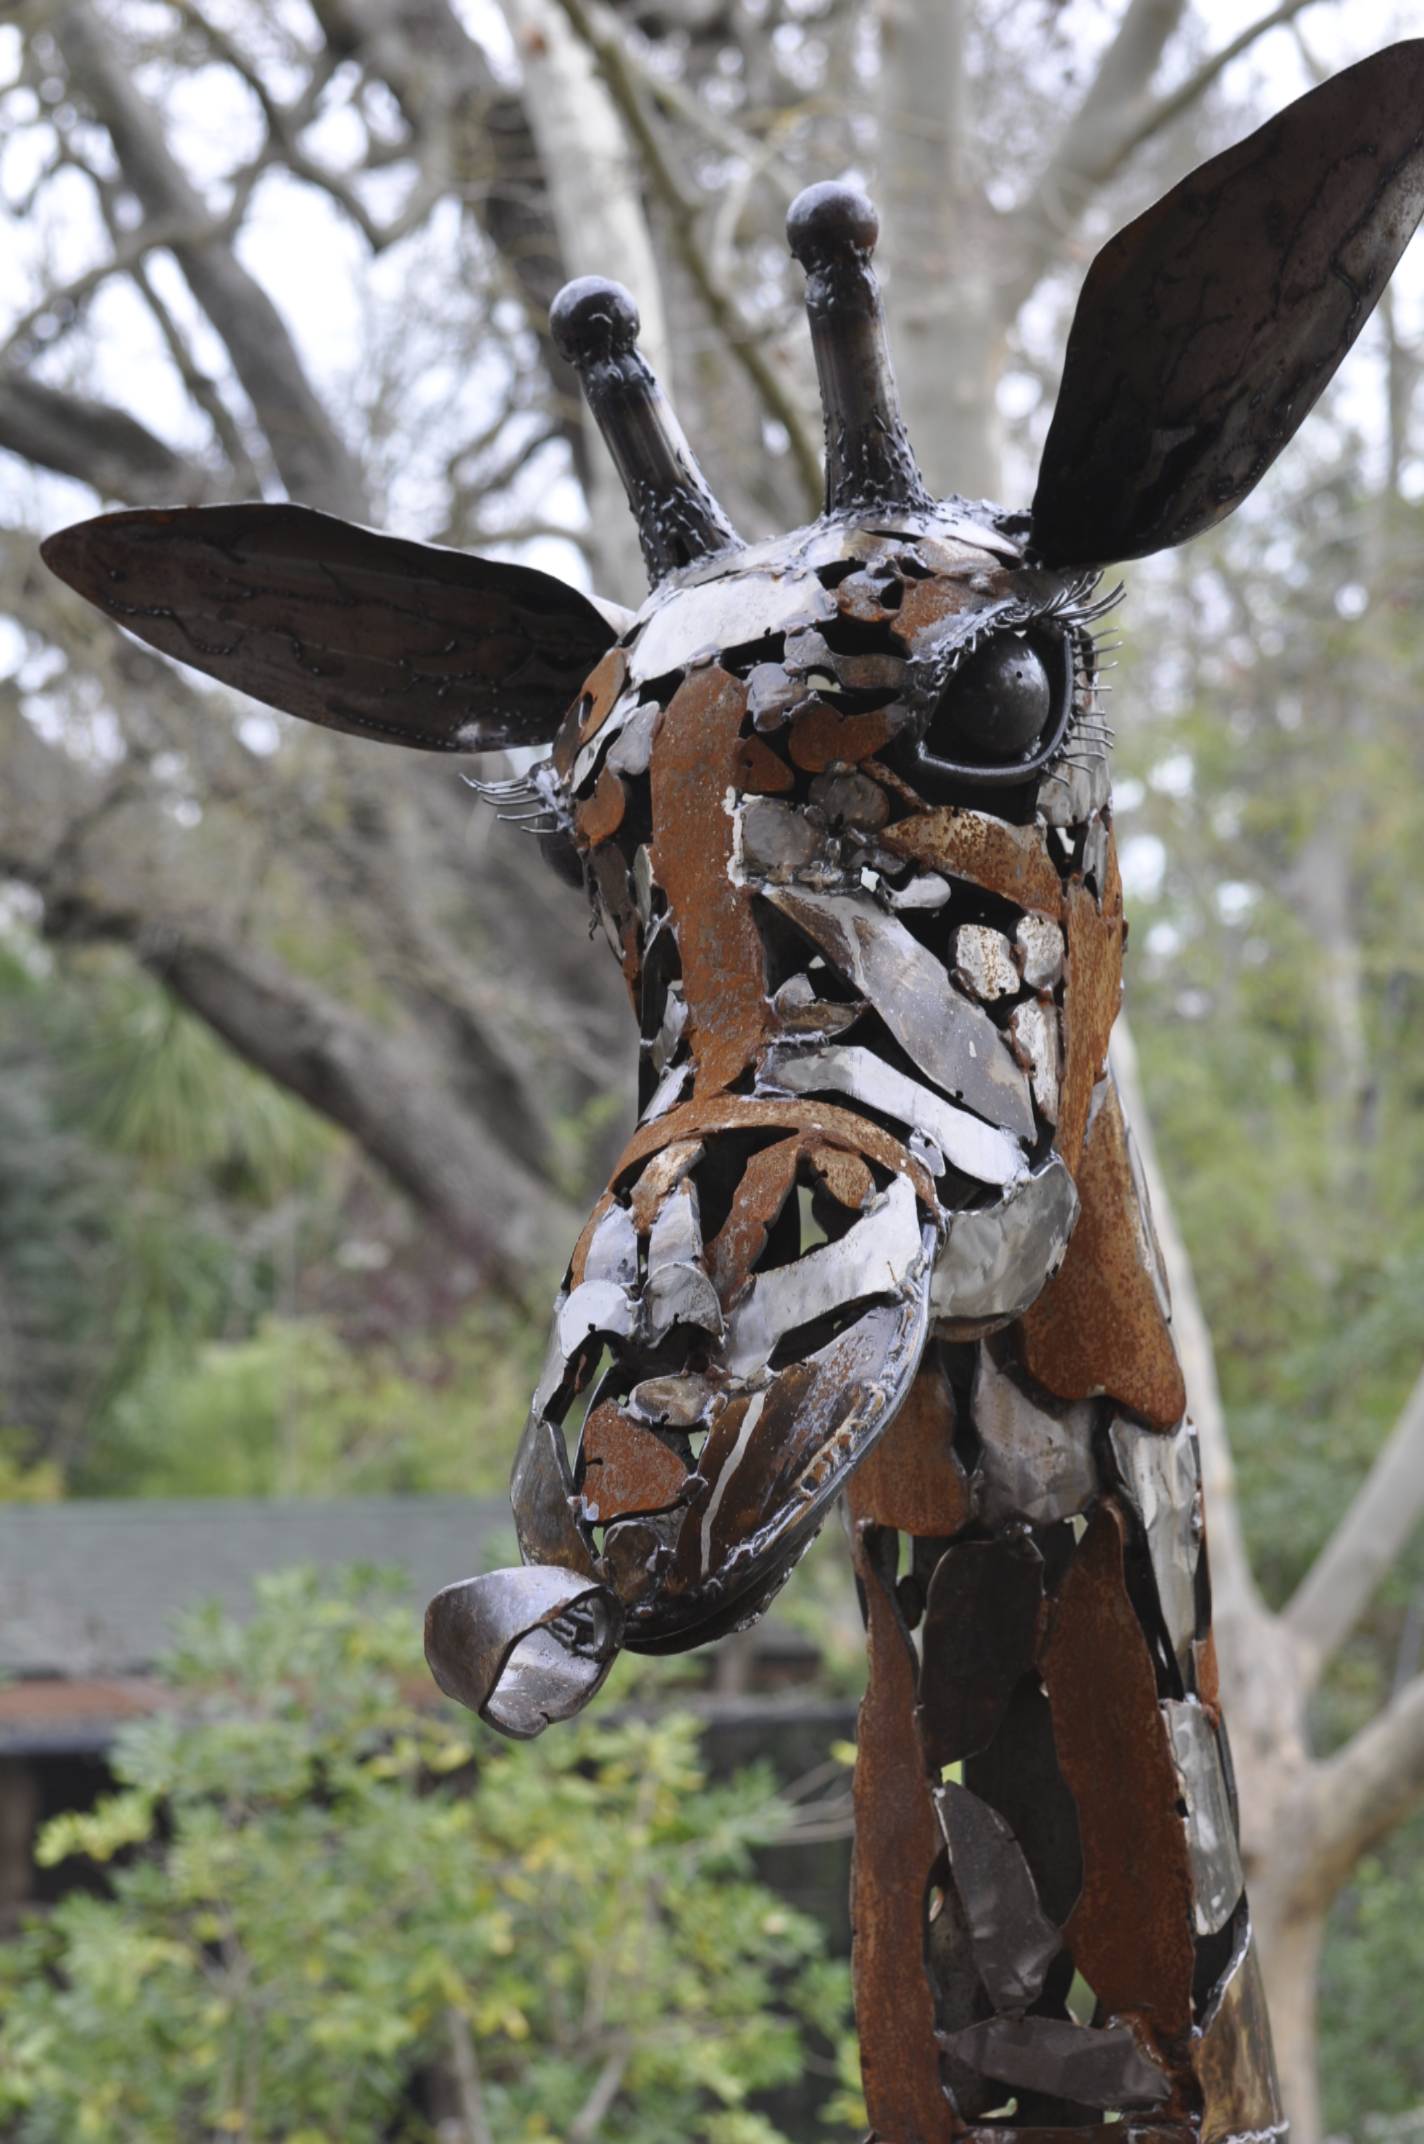 Up to My Neck (giraffe sculpture) by Terrence Martin